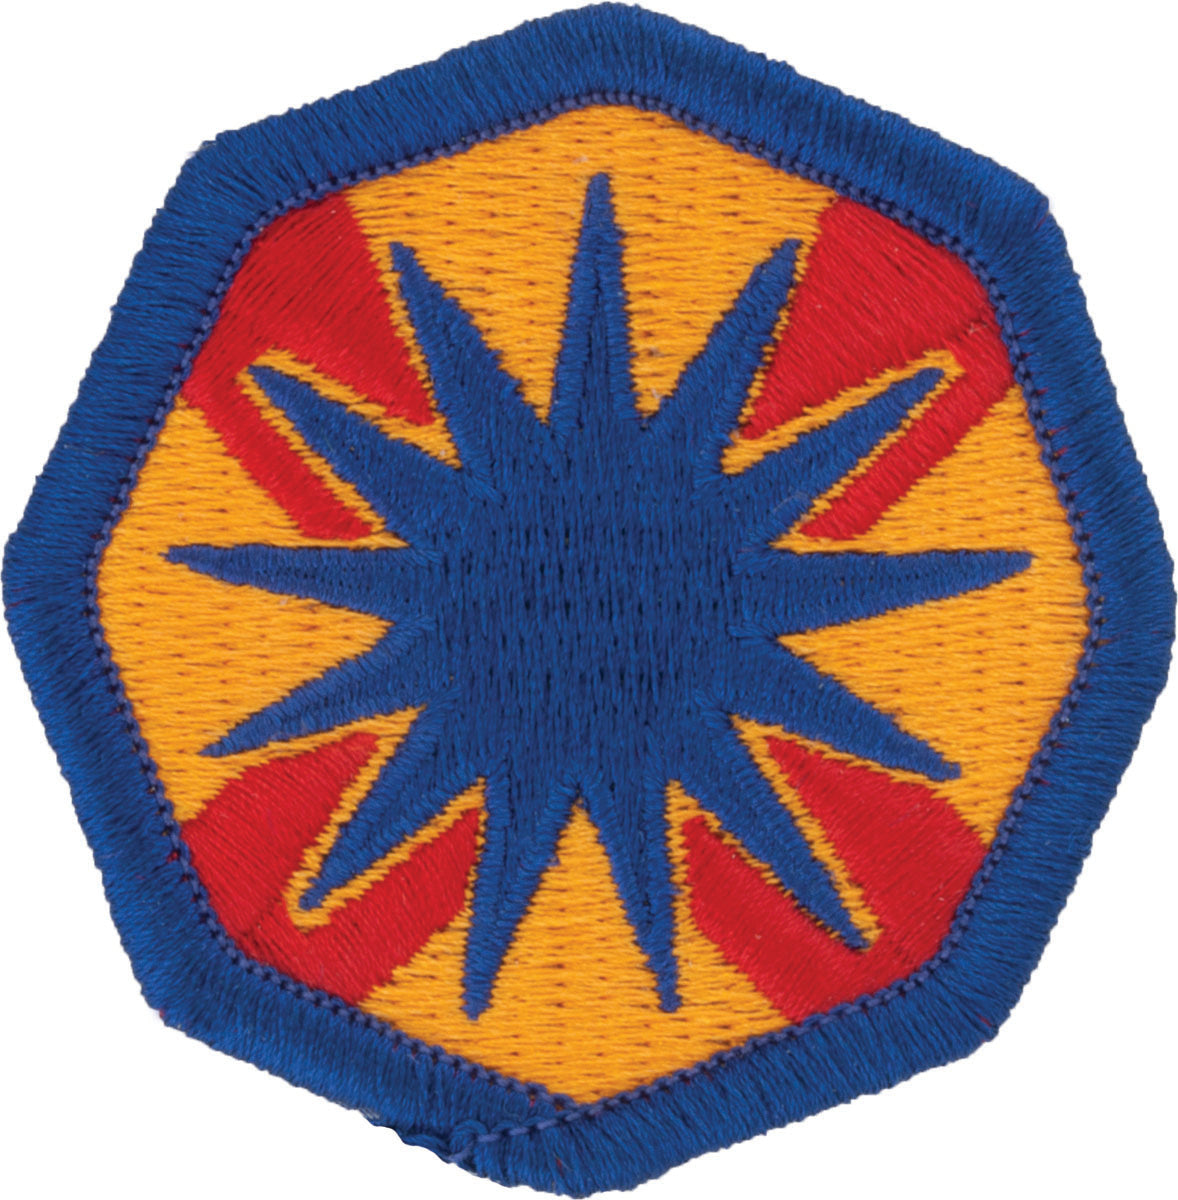 13th Sustainment Command Patch